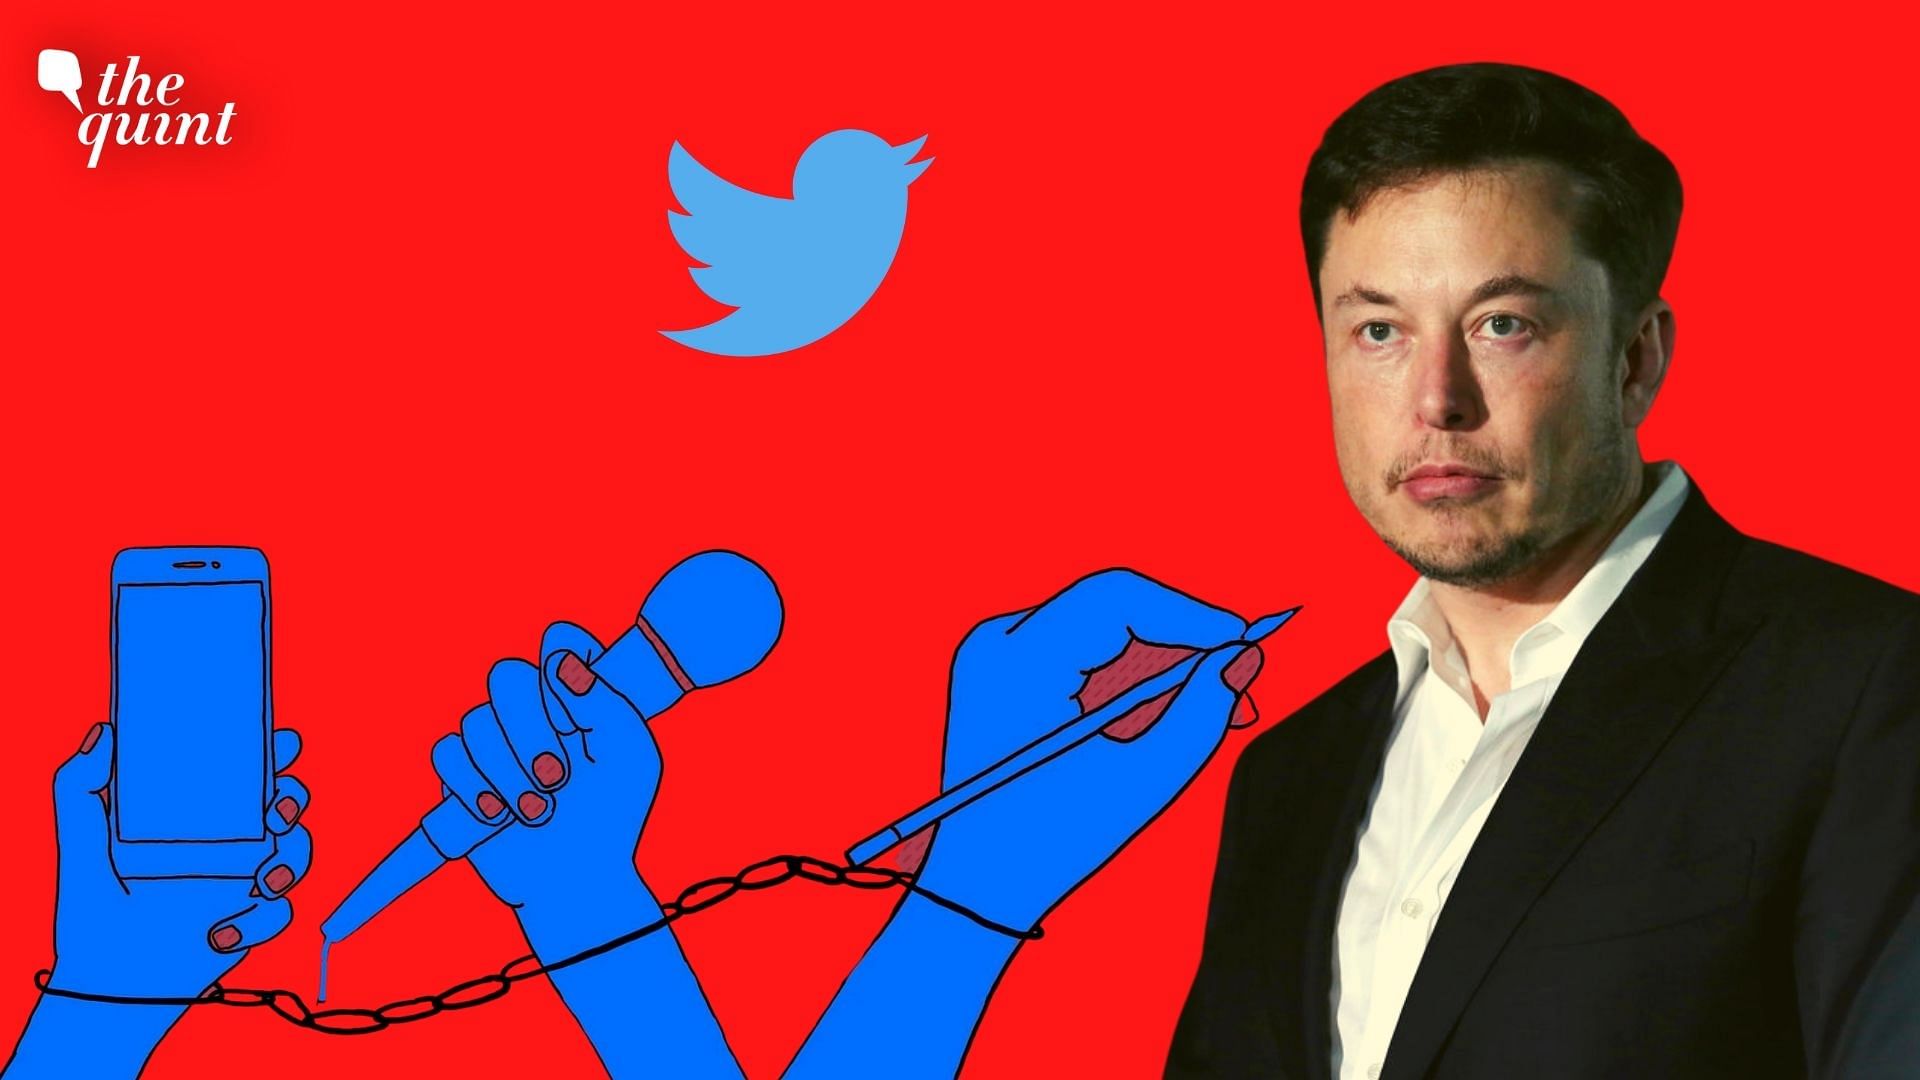 <div class="paragraphs"><p>It remains to be seen whether Twitter will continue to sue the Indian government, given that Elon has stated that Twitter will follow "...the laws of the land." This case raises an appropriate question for Elon and his new Twitter team: what would Twitter do when the laws of the land already limit freedom of expression?</p></div>